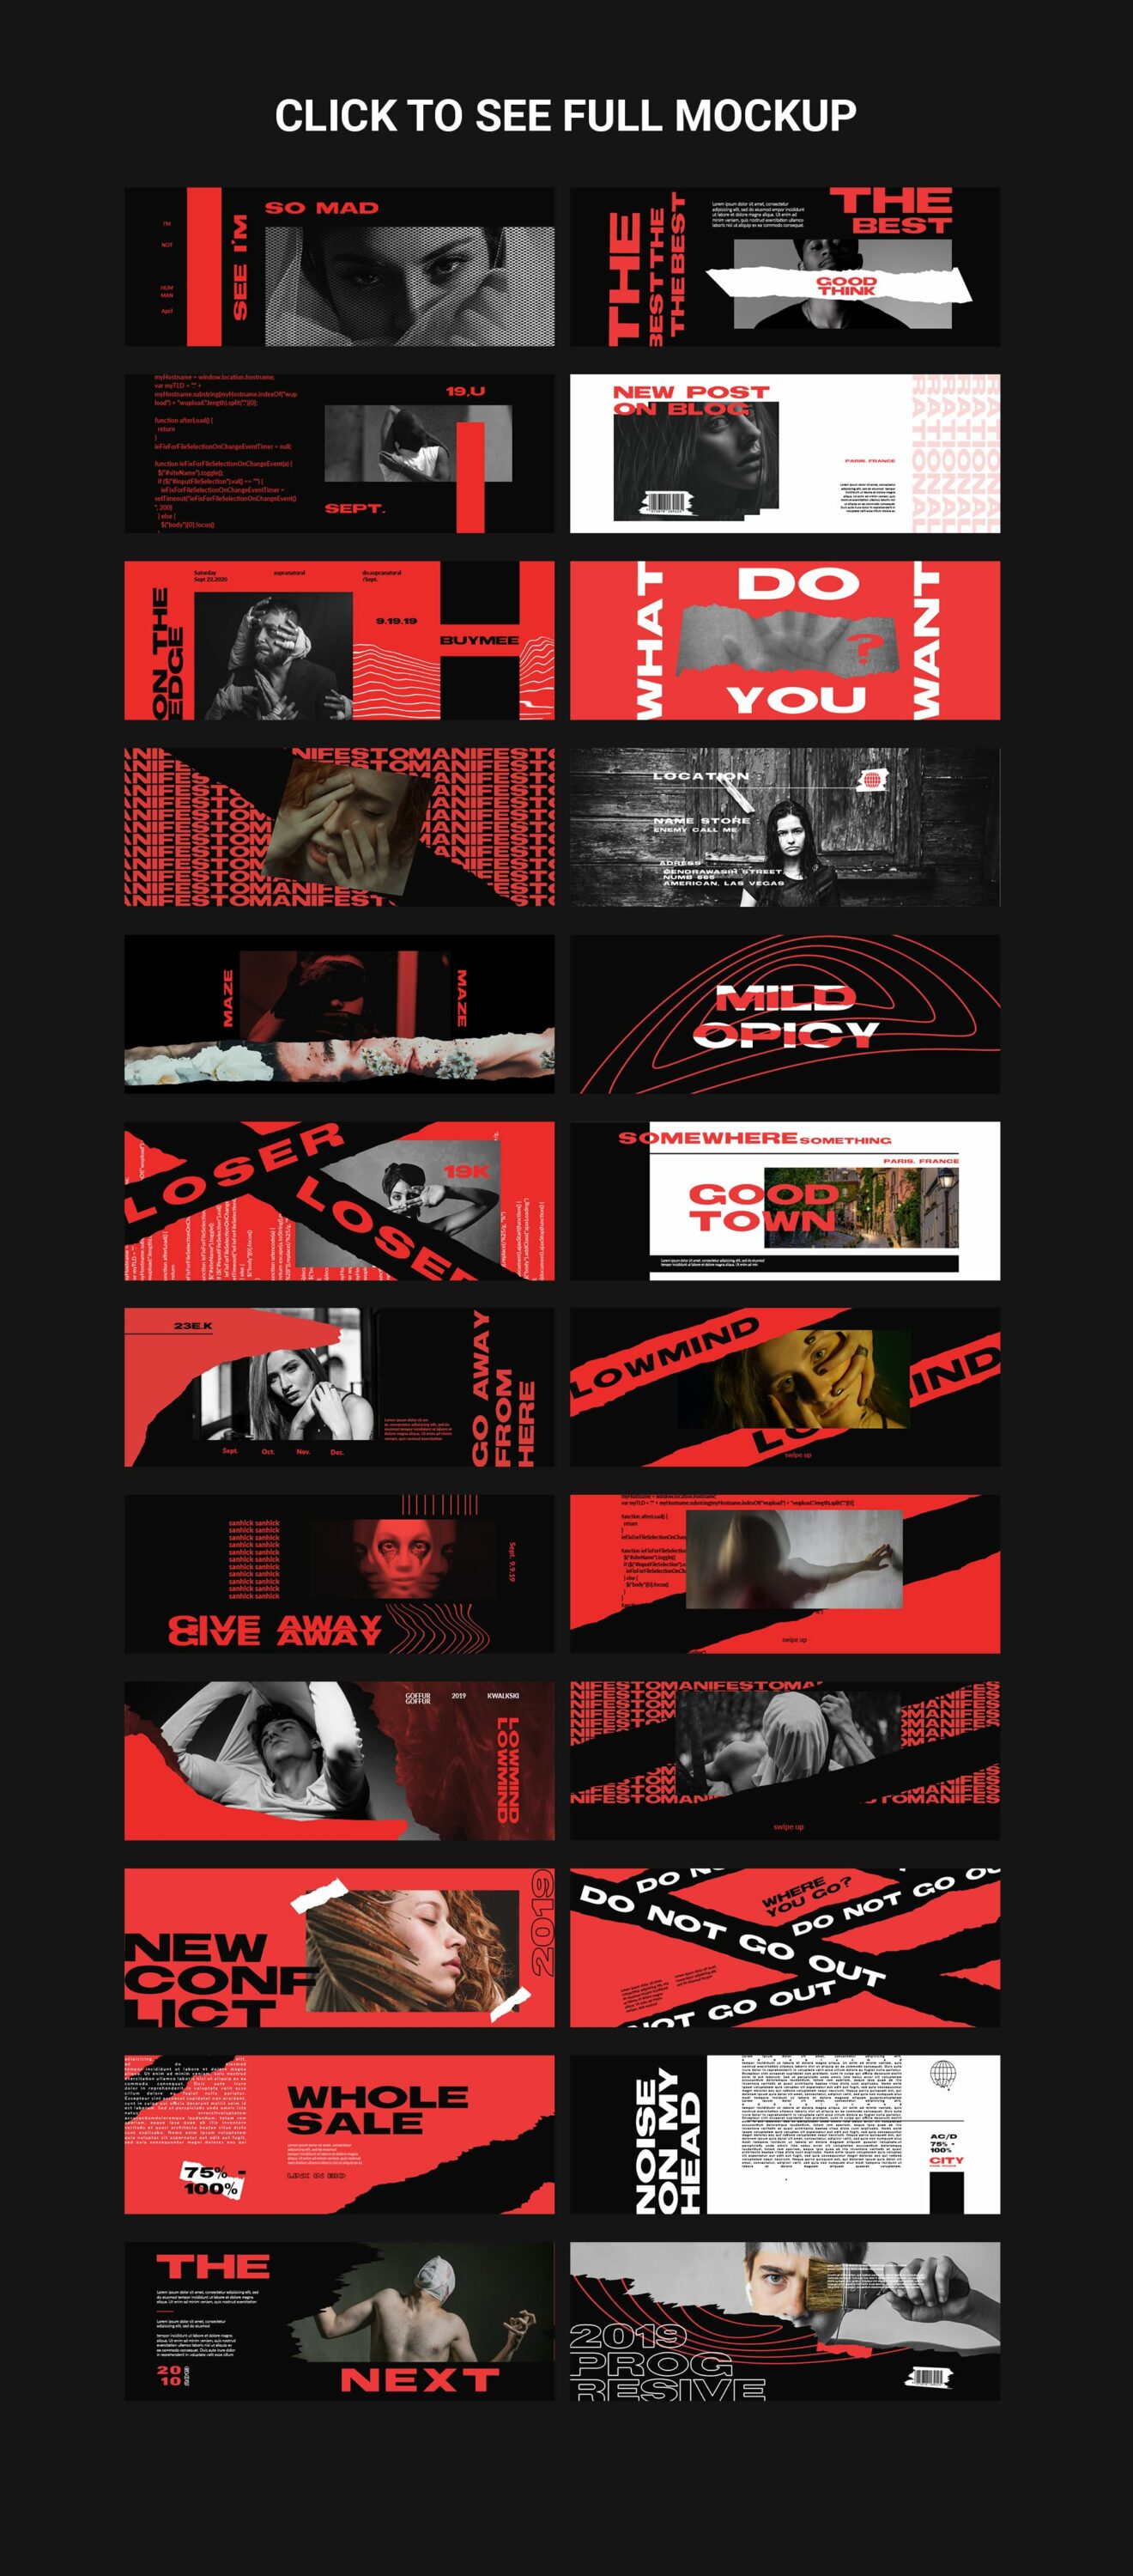 This is a big collection of facebook covers in black and red.